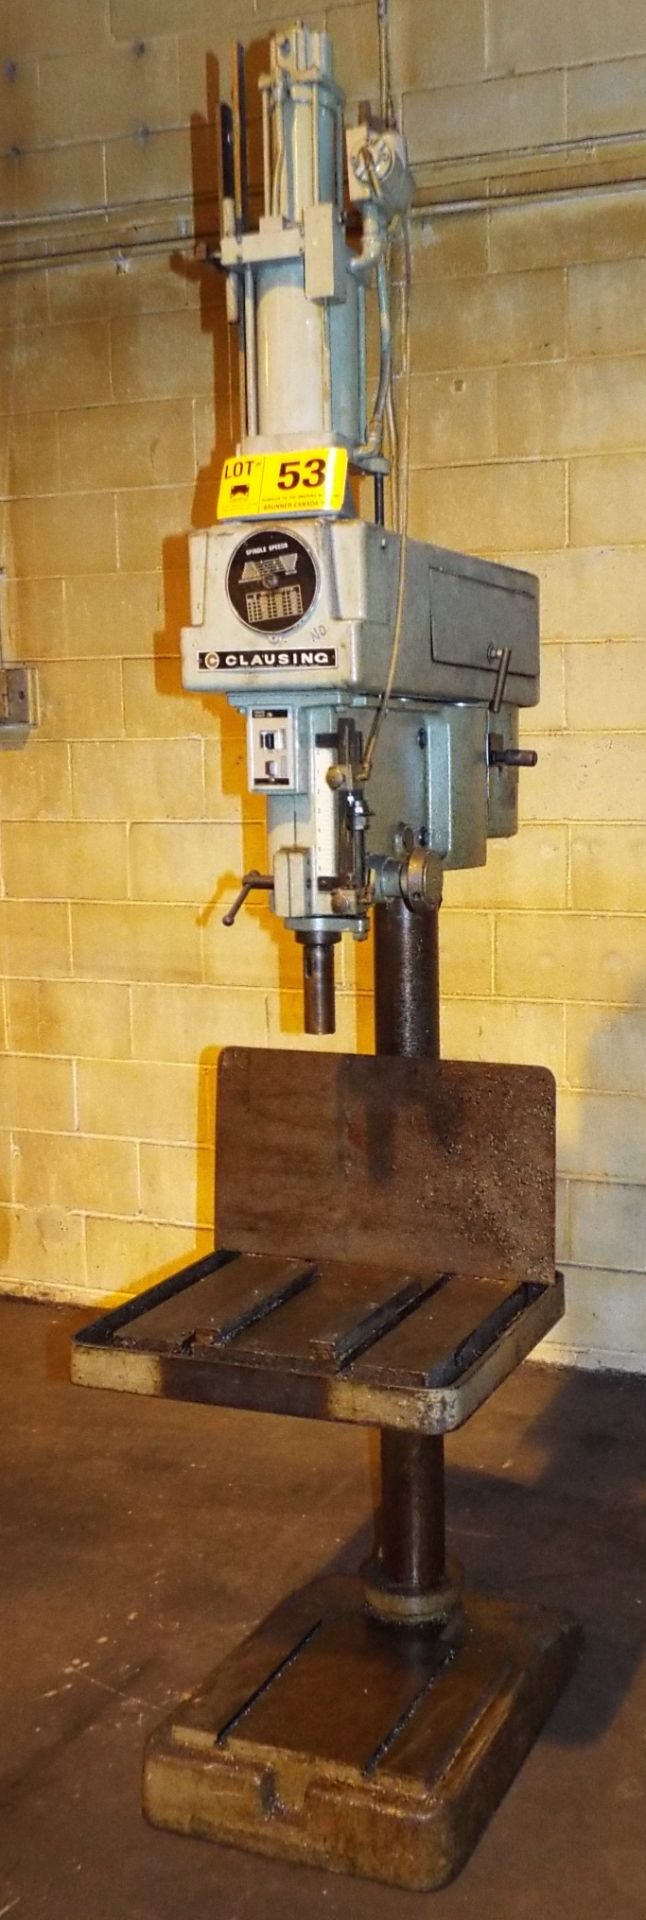 CLAUSING 2224 TAPPING HYDRAULIC DRILL PRESS S/N: 106108 (CI)